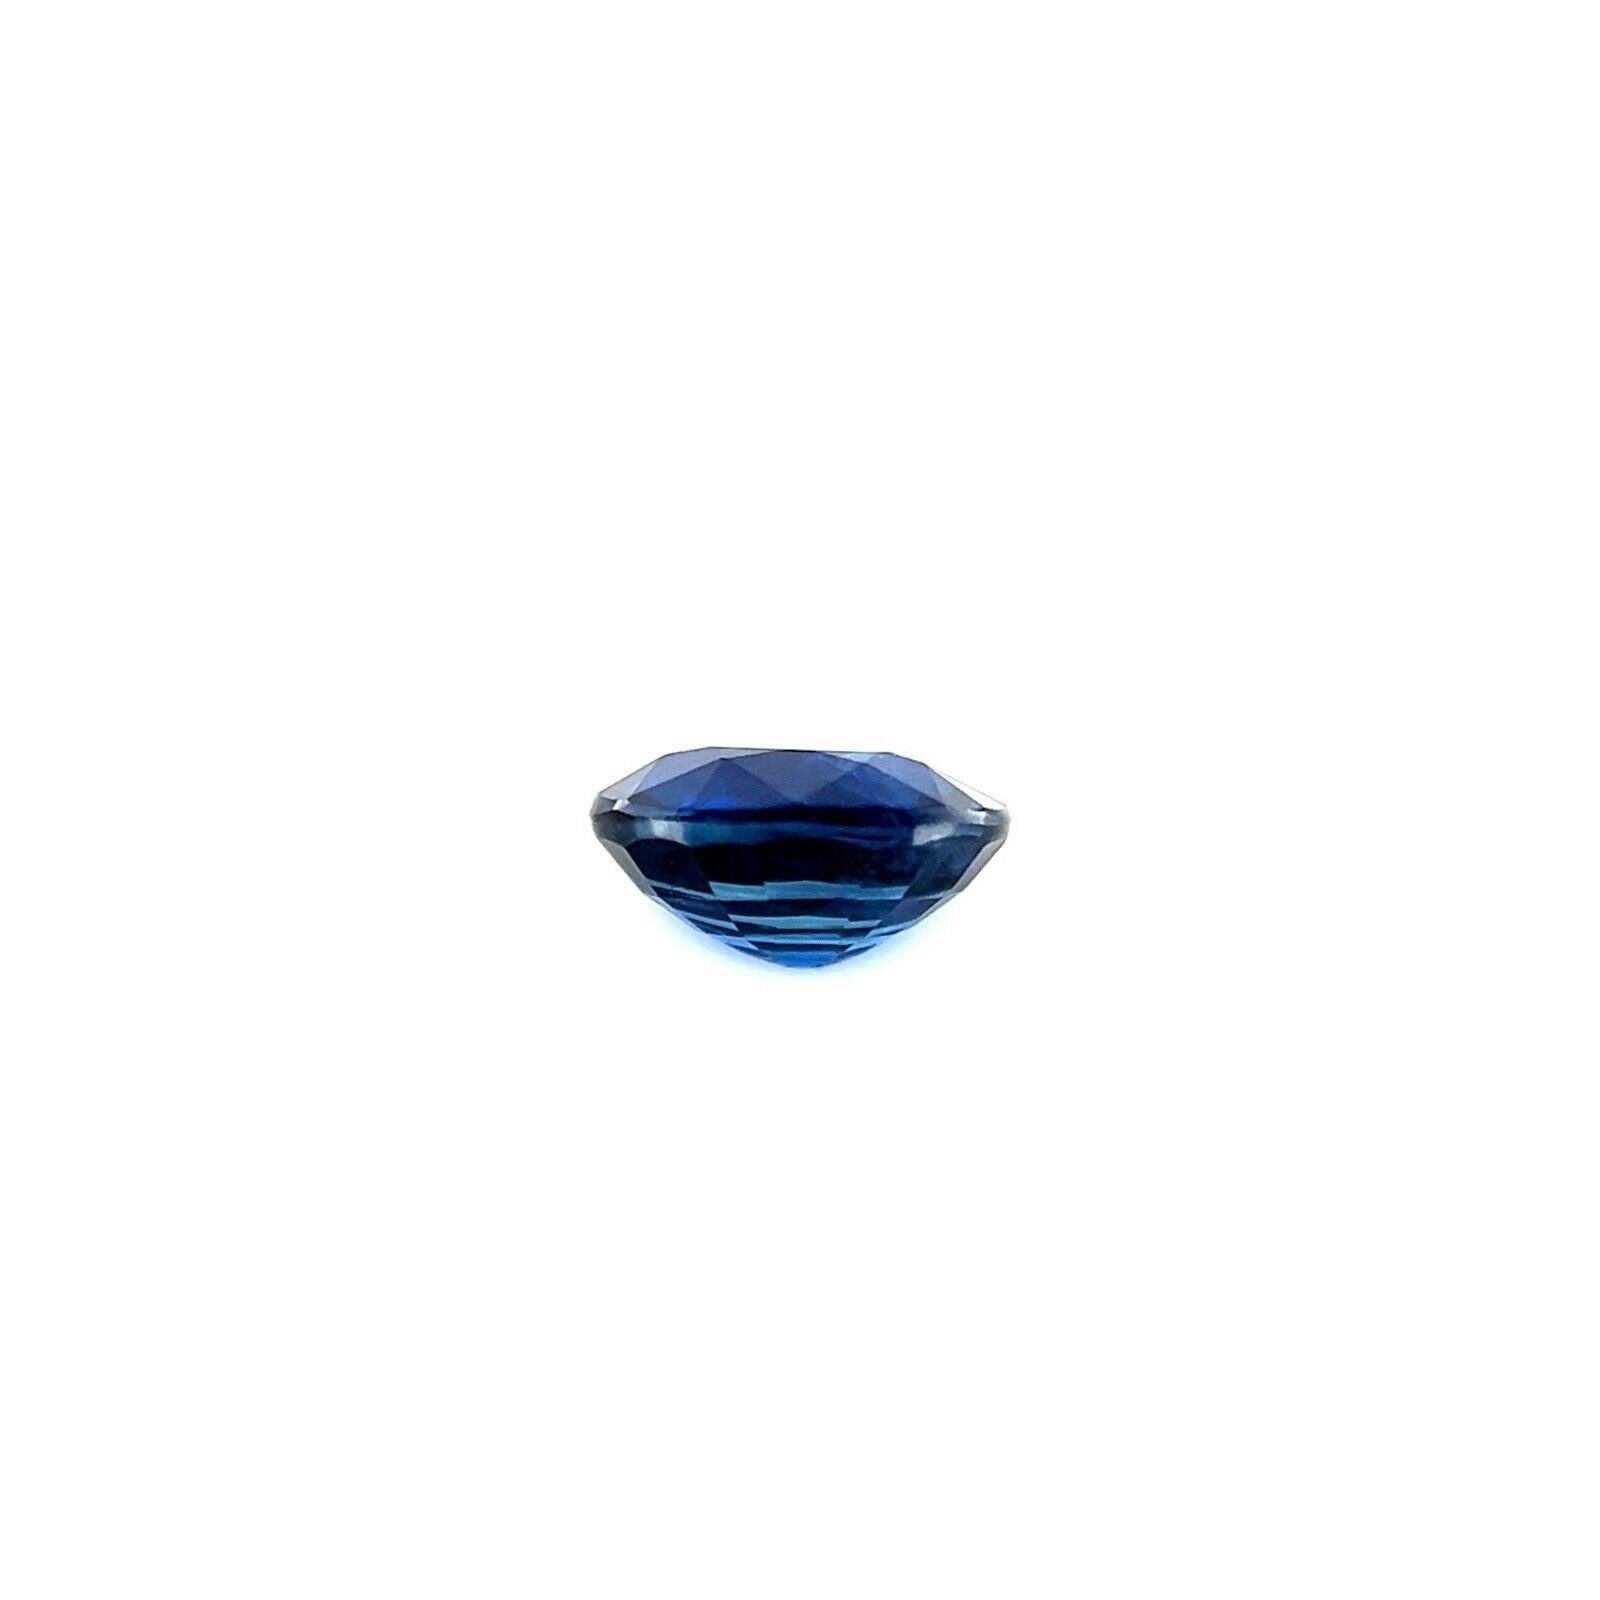 Fine Royal Blue 0.52ct Australian Sapphire Oval Cut Rare Loose Gem 5x4.2mm

Fine Royal Blue Natural Australian Sapphire Gemstone.
0.52 Carat with a beautiful deep royal blue colour and excellent clarity, a very clean stone. Also has an excellent